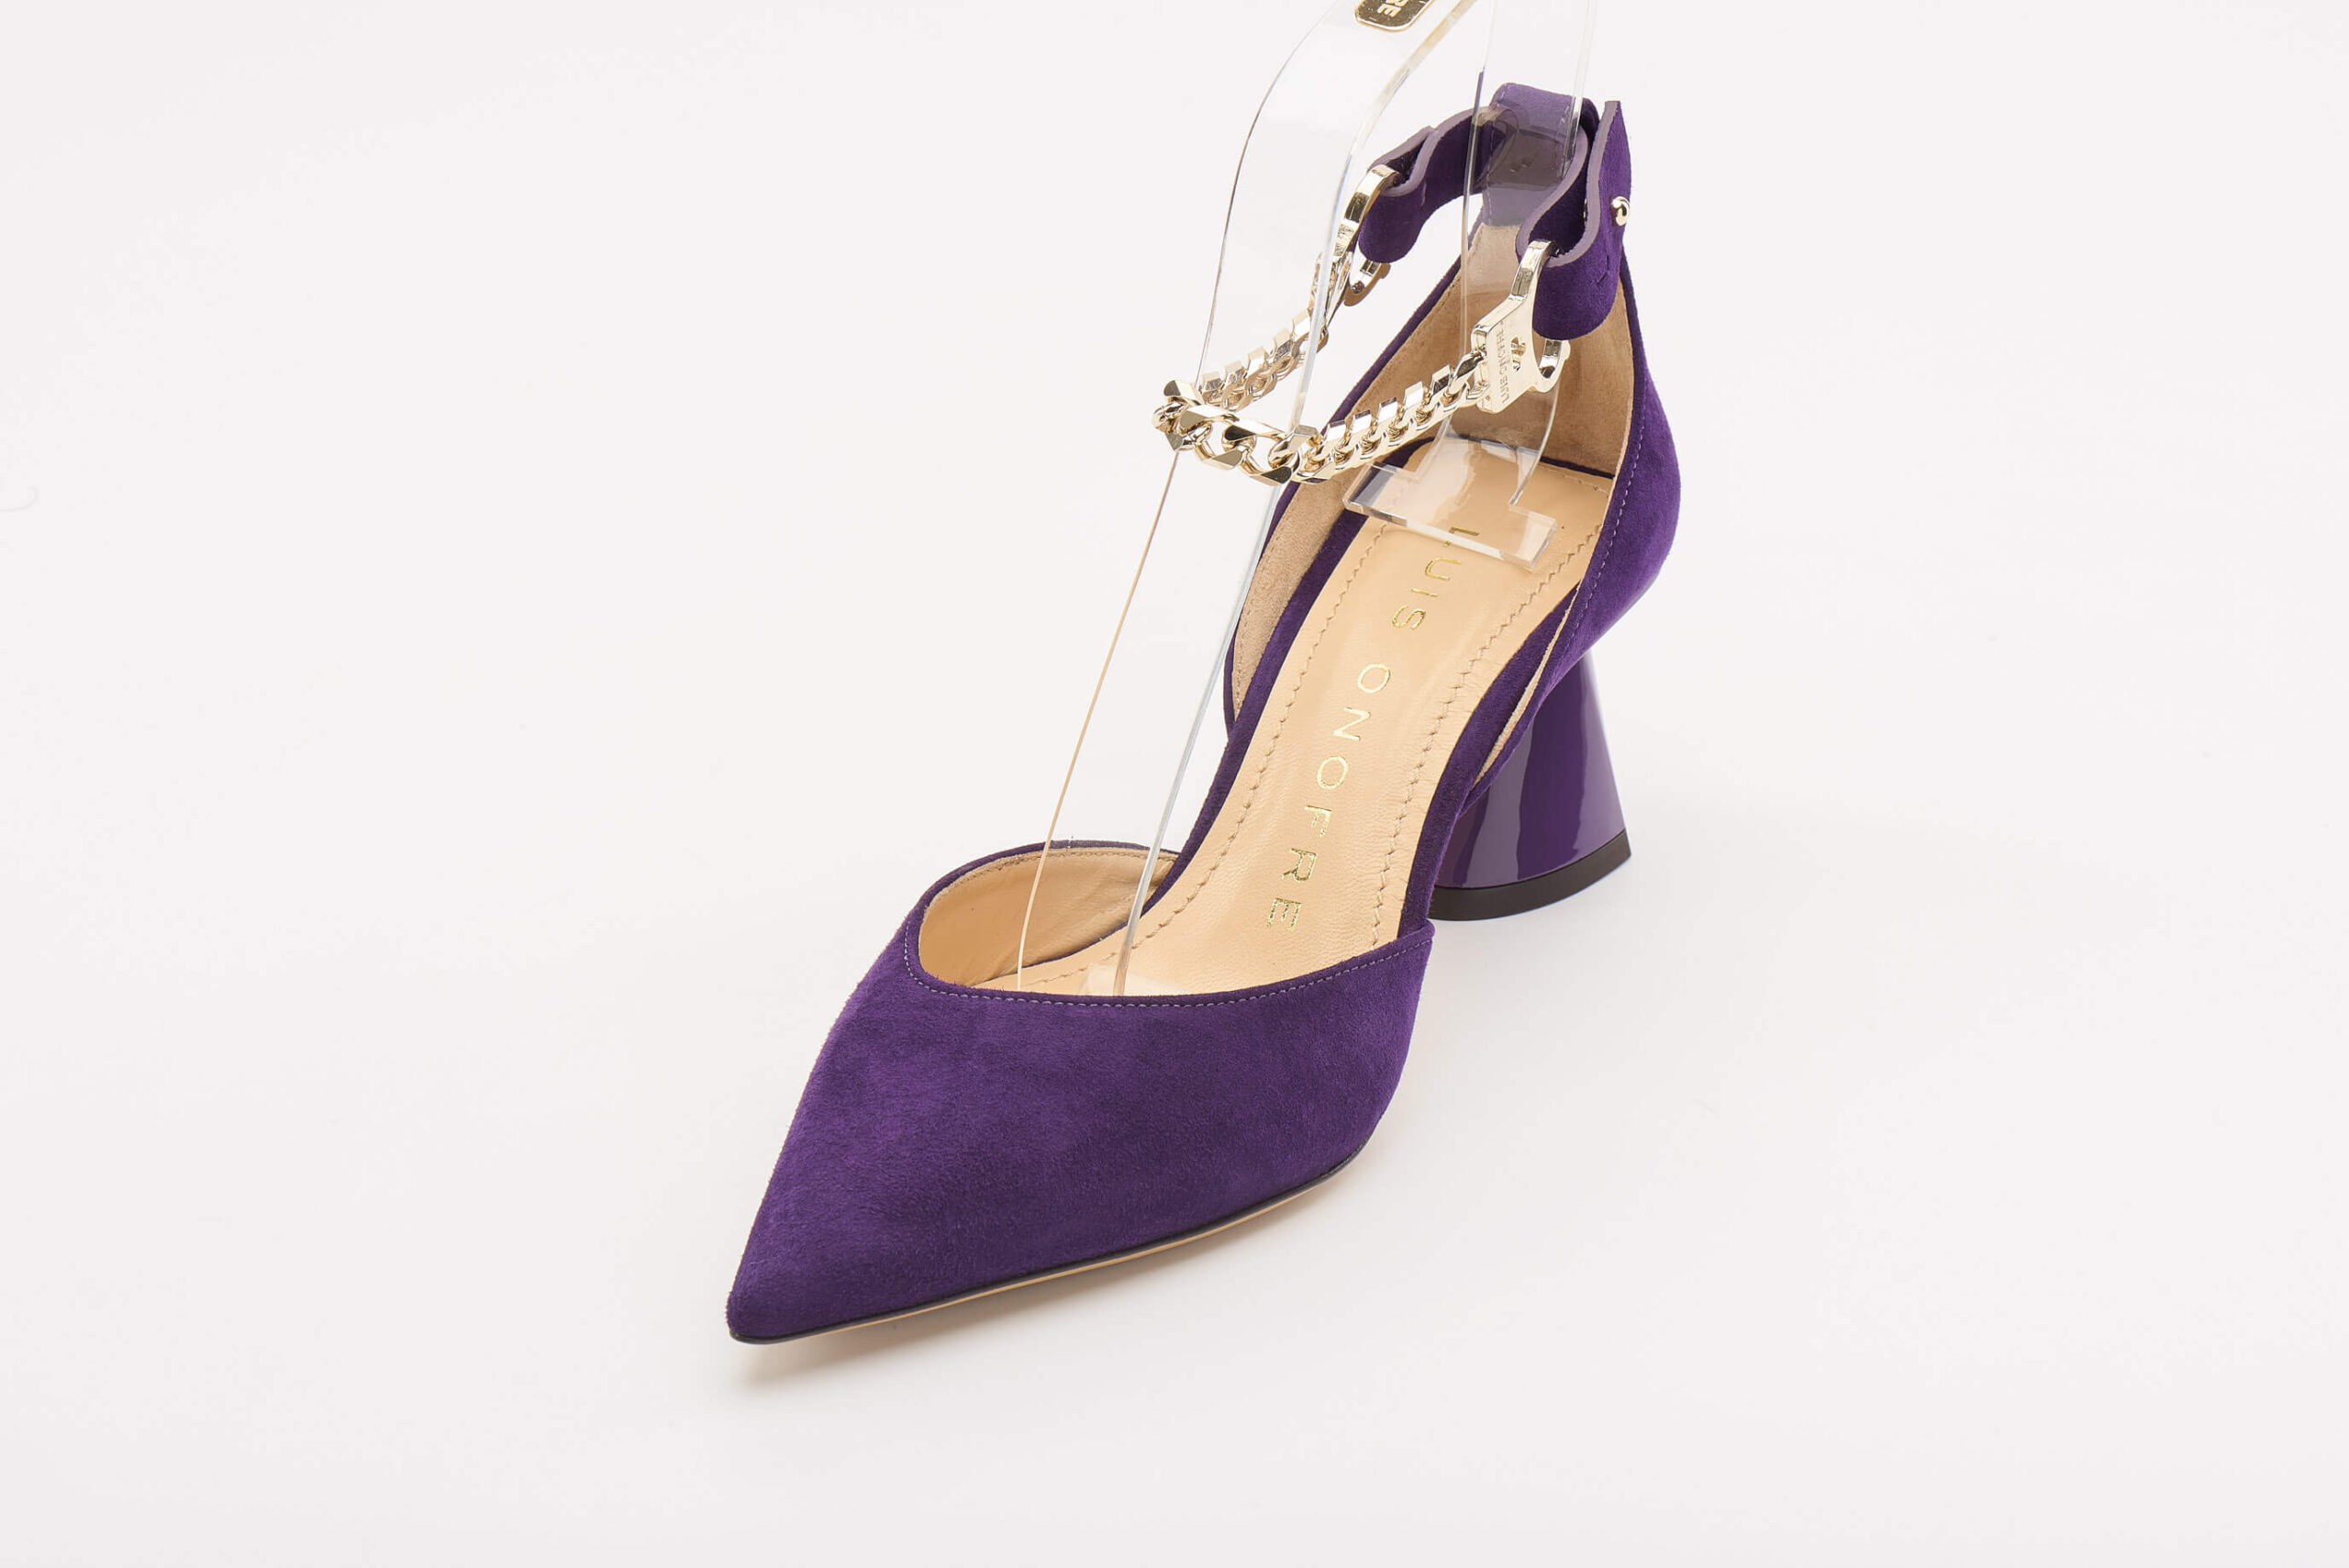 Luis Onofre Portuguese Shoes FW23 – Enigma Collection – 5492_02 – RIDDLE Purple-4